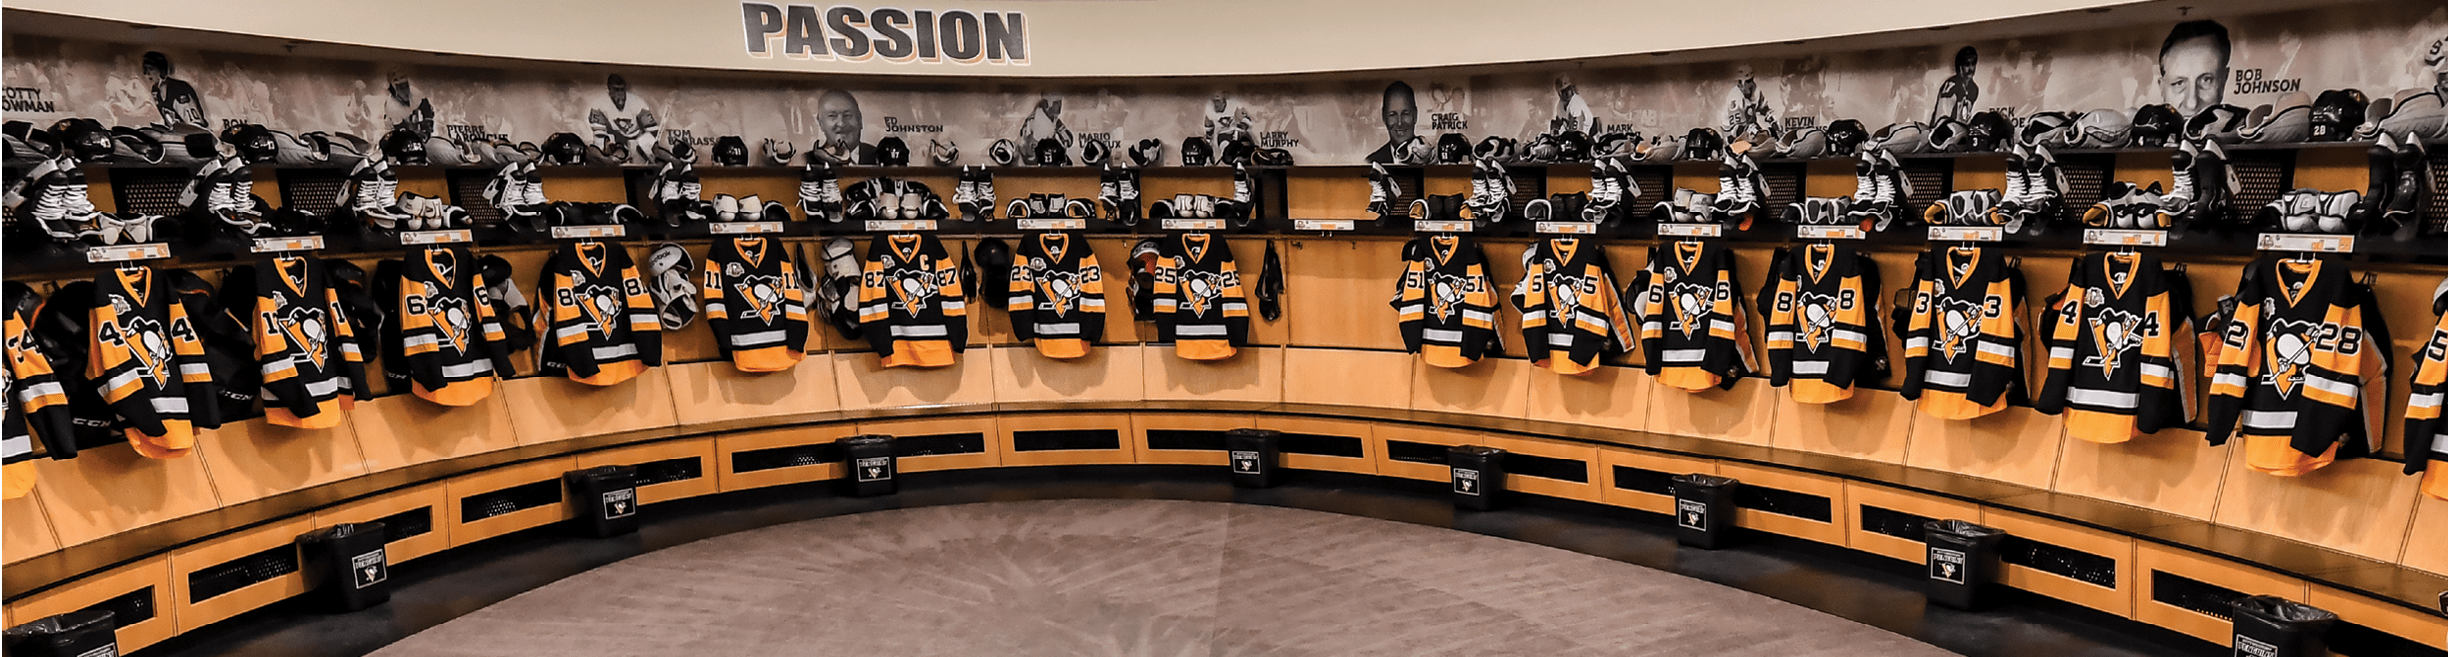 October 9, 2016 - Pittsburgh Penguins Fan Fest at the PPG Paints Arena 